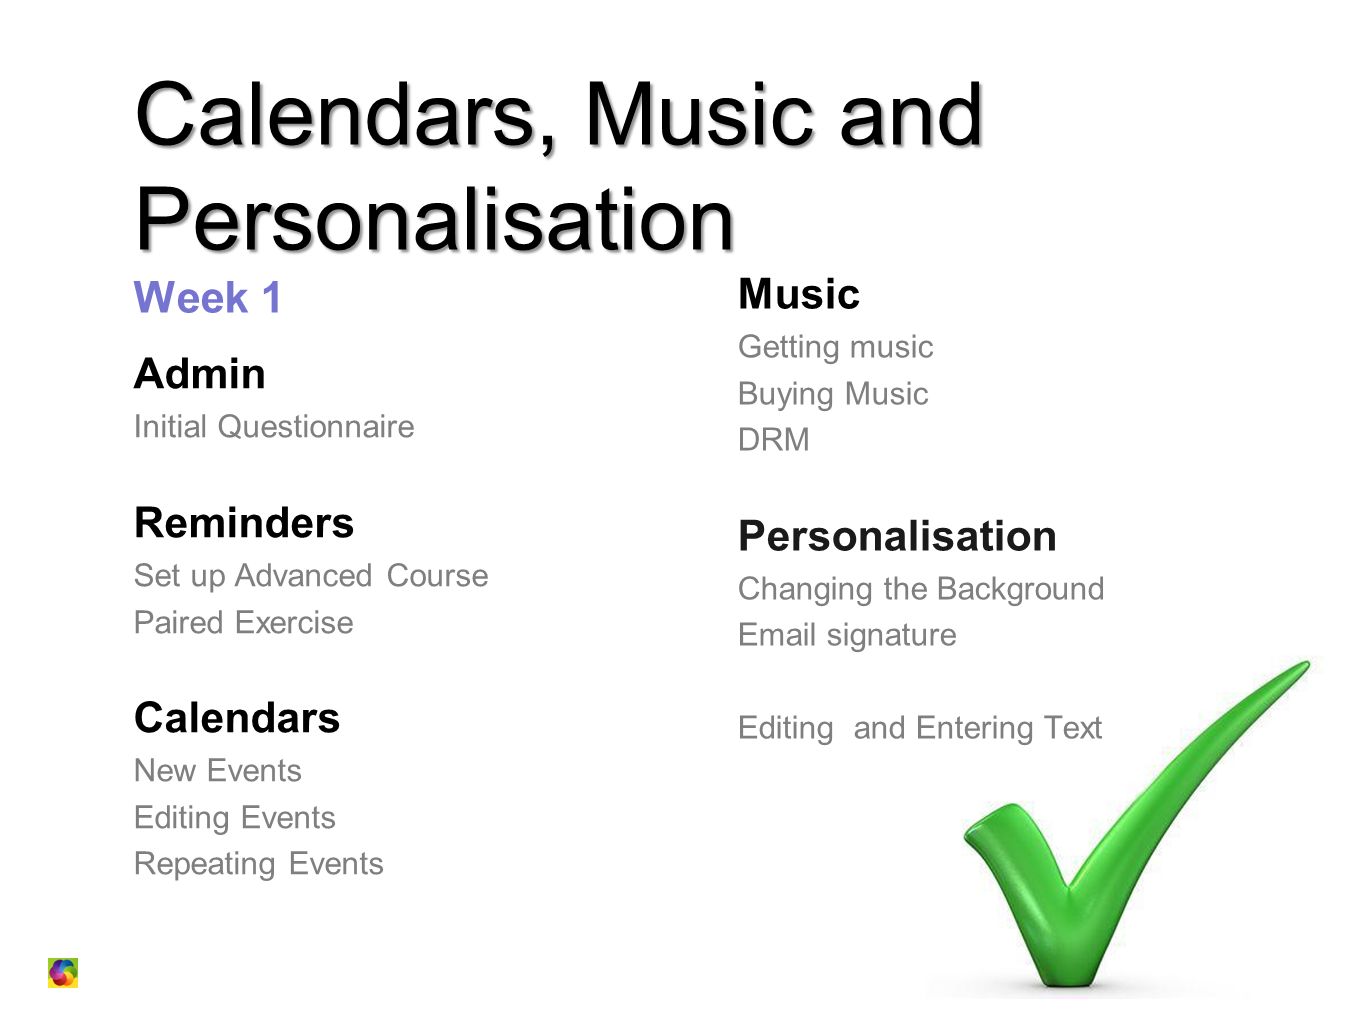 Calendars, Music and Personalisation Calendars, Music and Personalisation Week 1 Admin Initial Questionnaire Reminders Set up Advanced Course Paired Exercise Calendars New Events Editing Events Repeating Events Music Getting music Buying Music DRM Personalisation Changing the Background  signature Editing and Entering Text